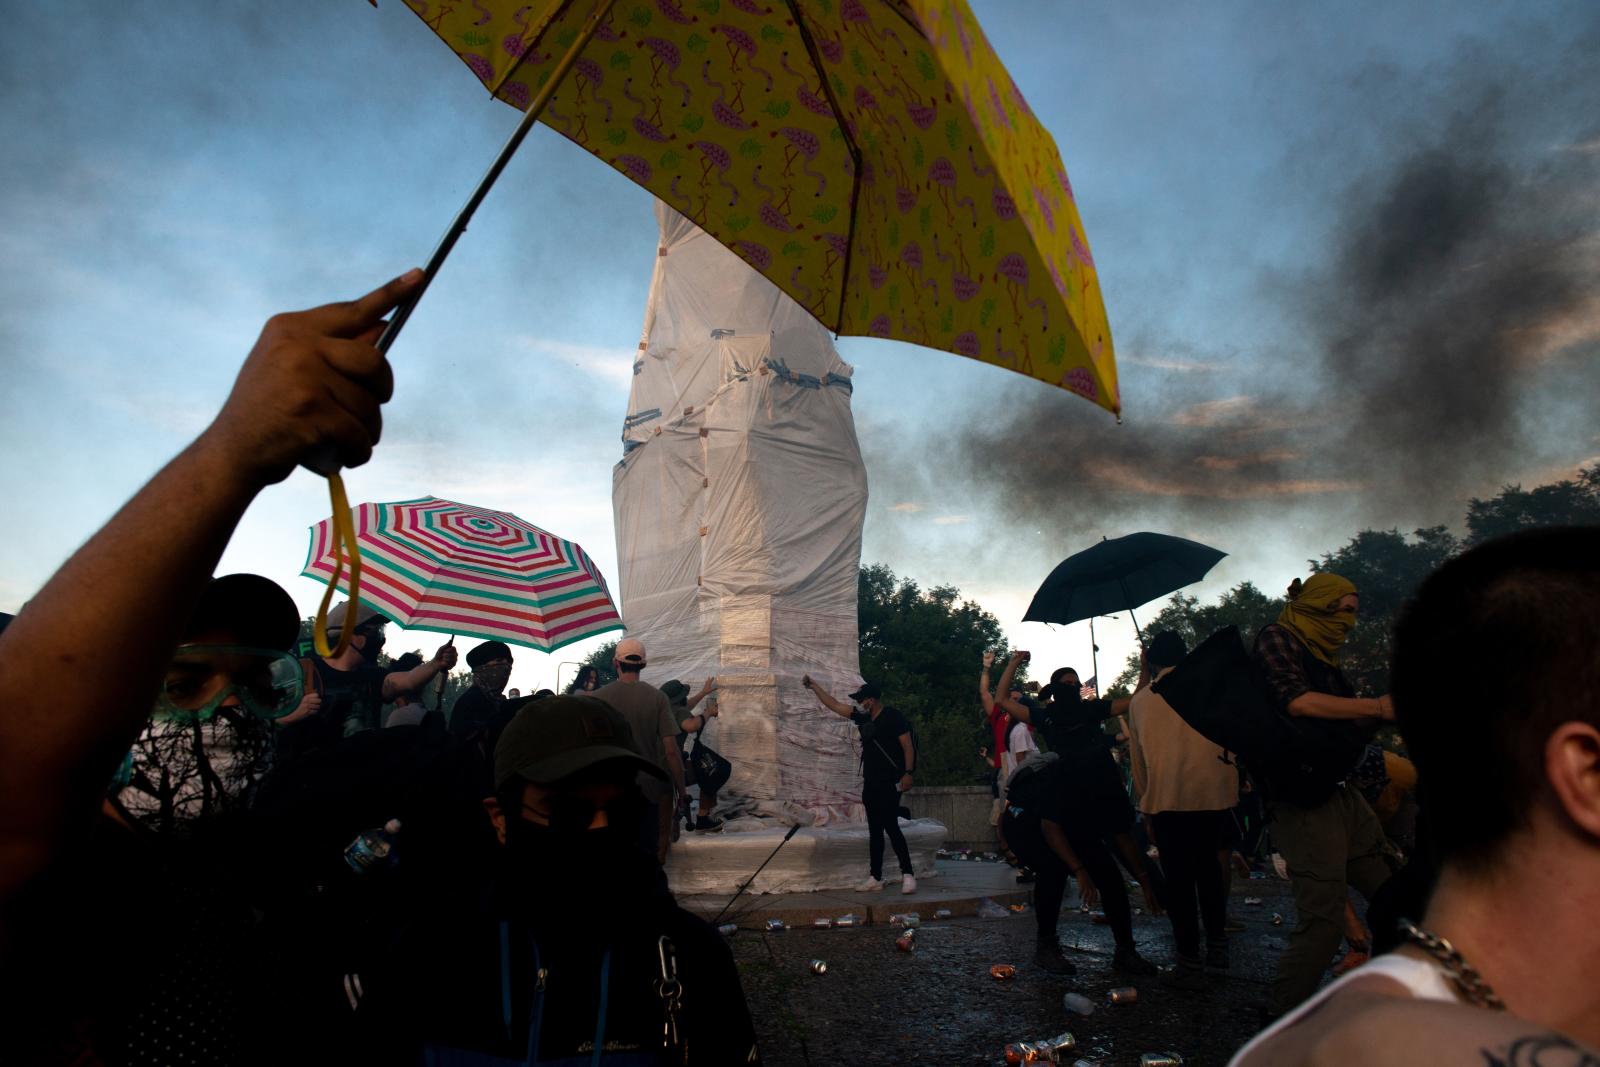 The Storming of the Columbus Statue  - Protestors briefly occupy the area surrounding the Columbus Statue in Grant Park.